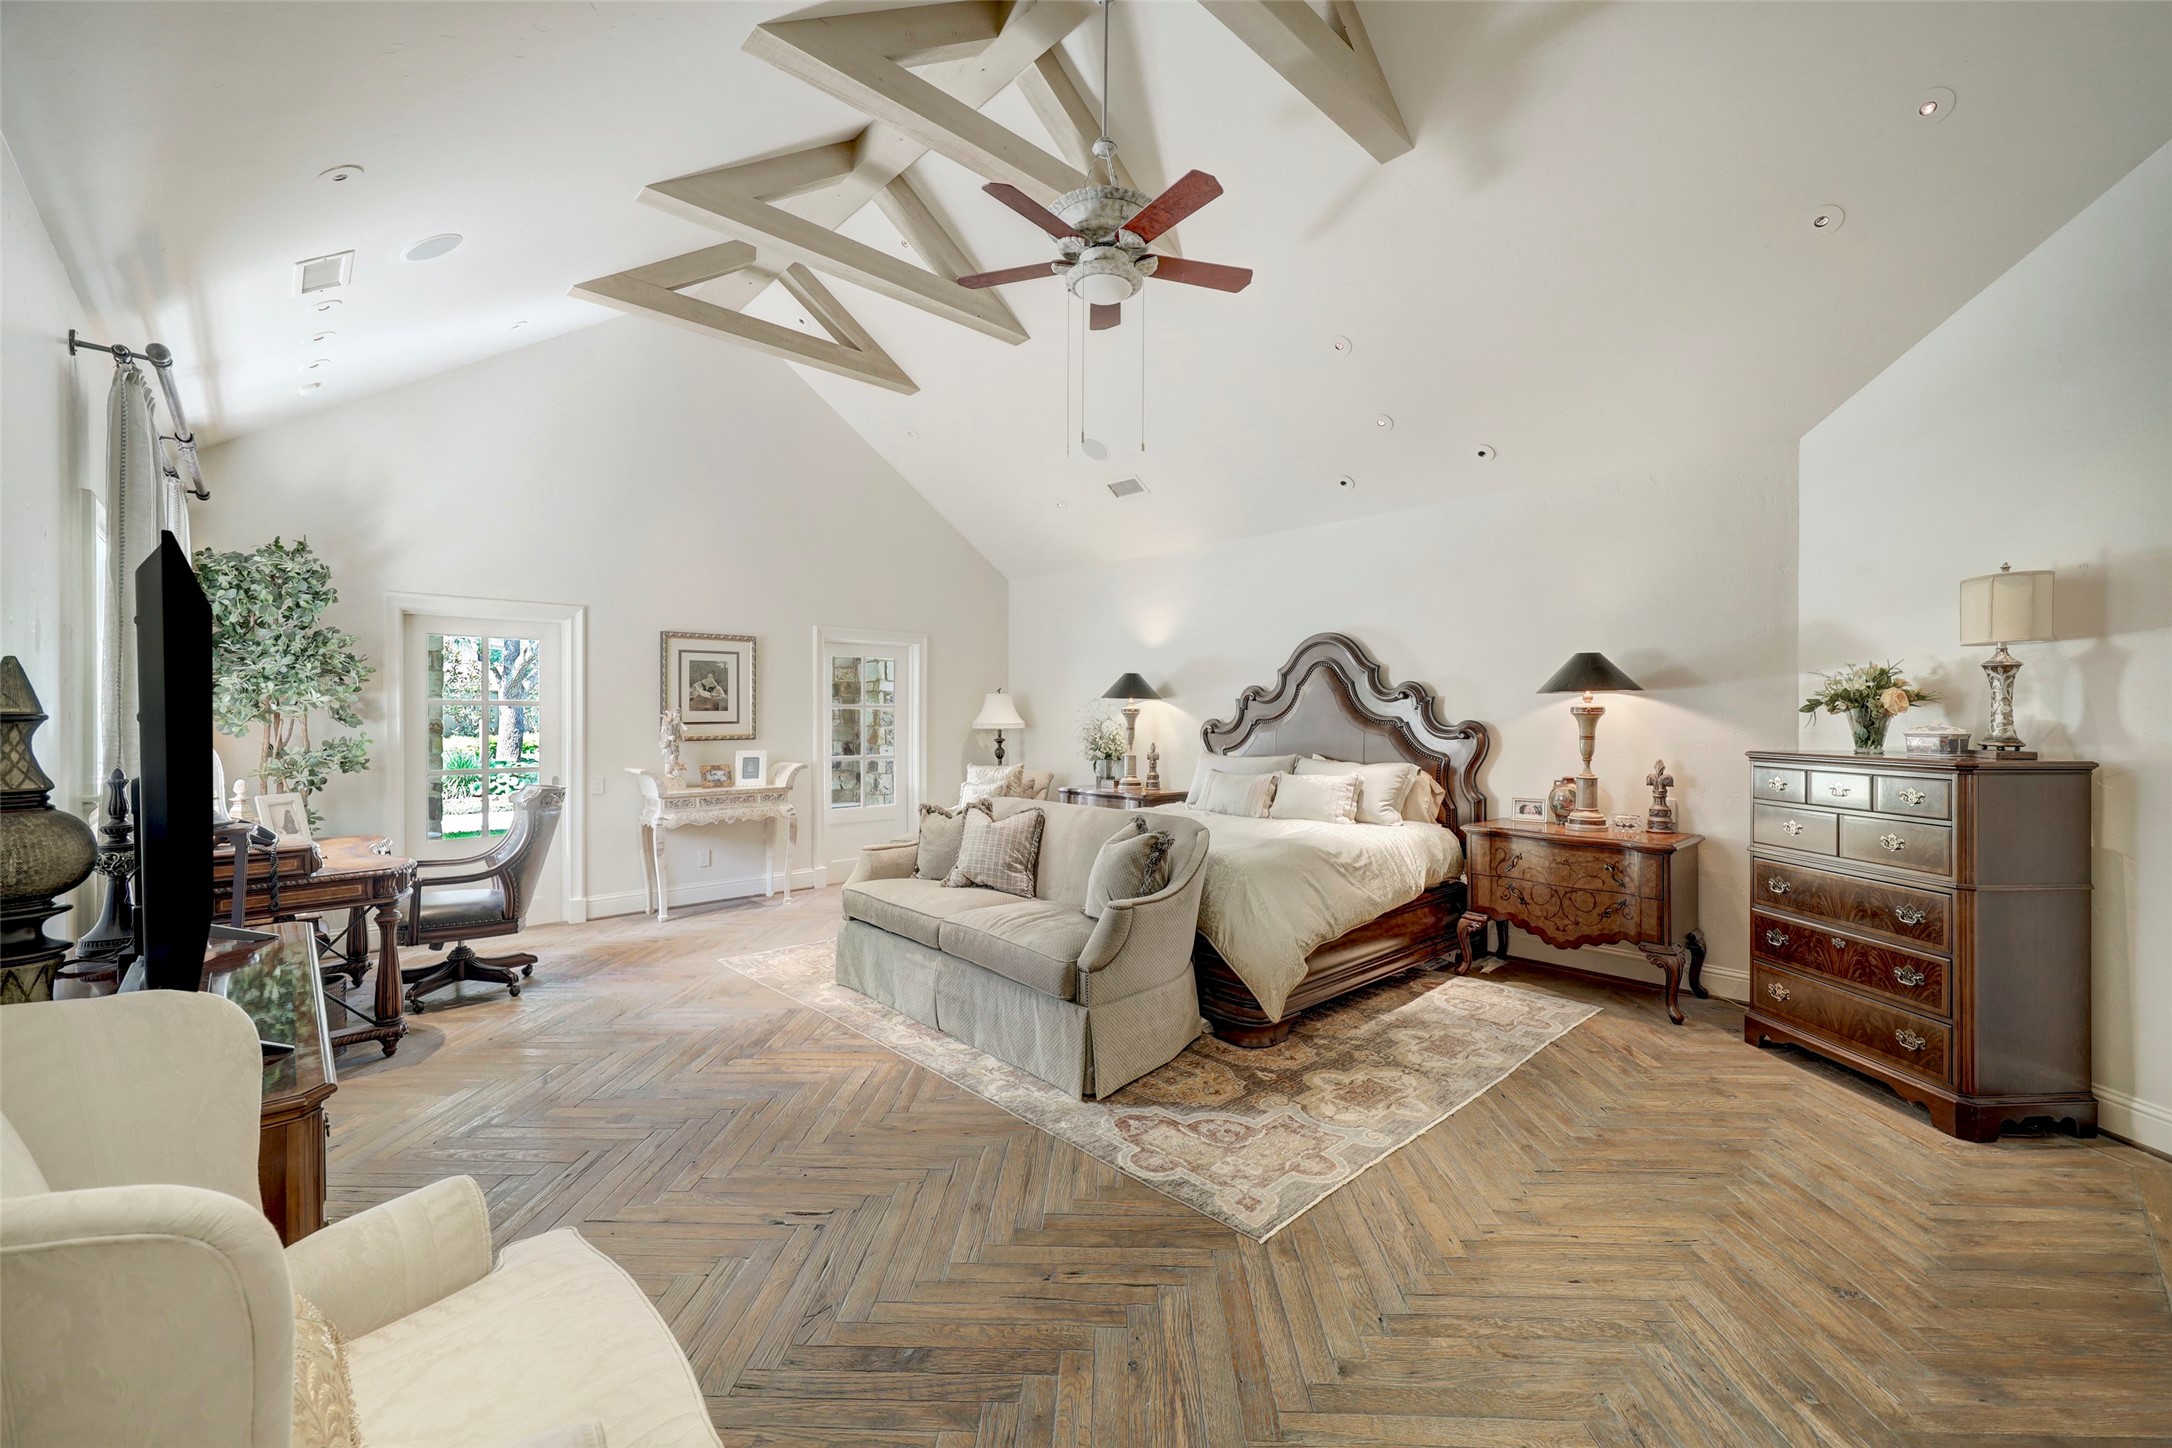 The primary bedroom is a retreat with vaulted beamed ceiling, stunning wood floor and access to the resort backyard.